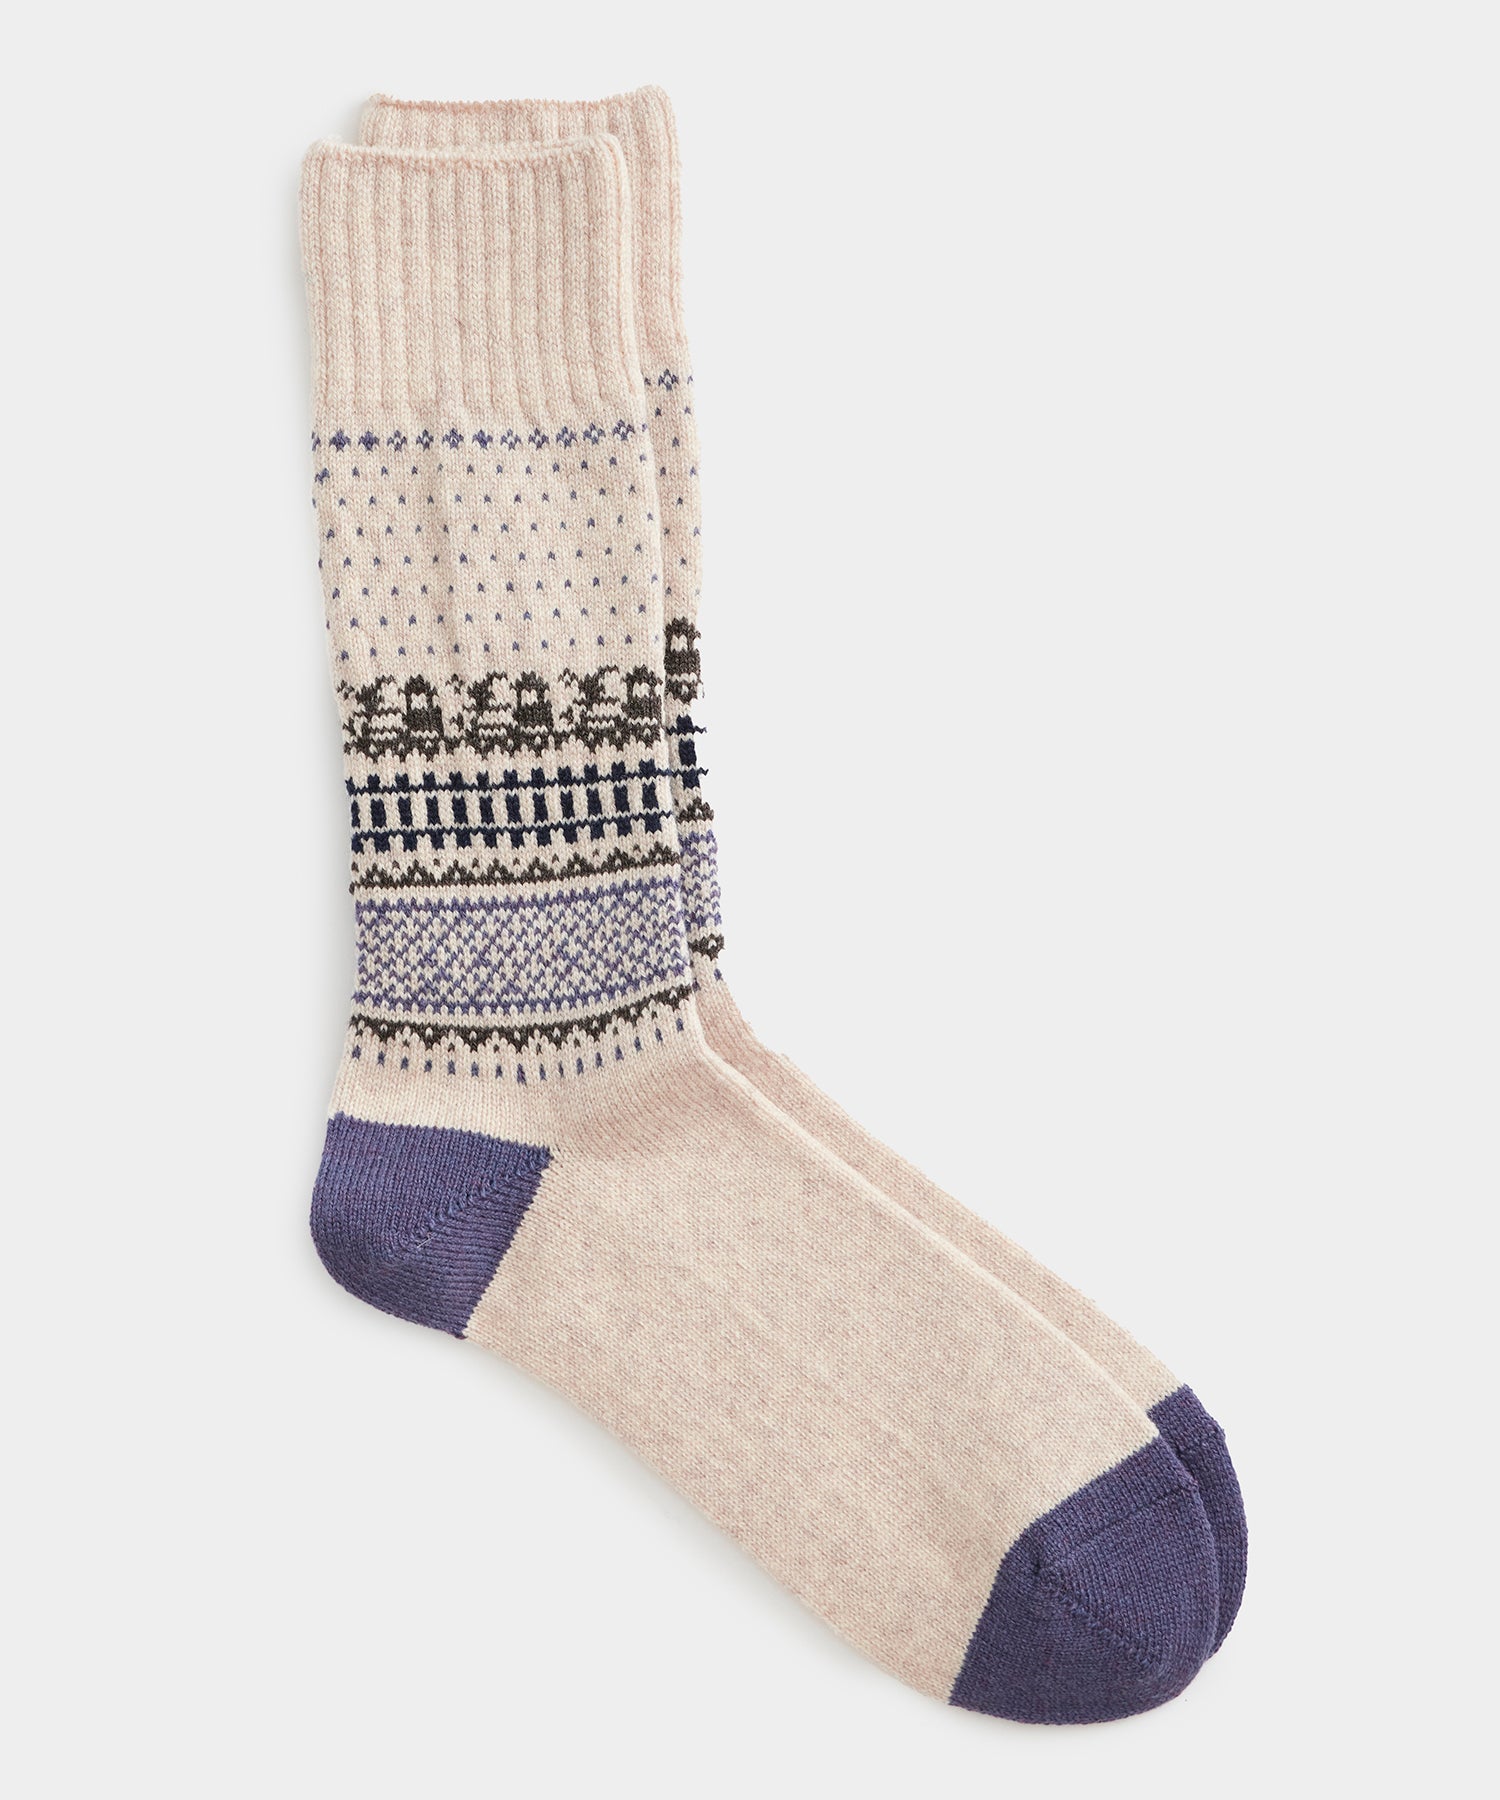 Bodega® x Todd Snyder CHUP Matching Sweater Sock